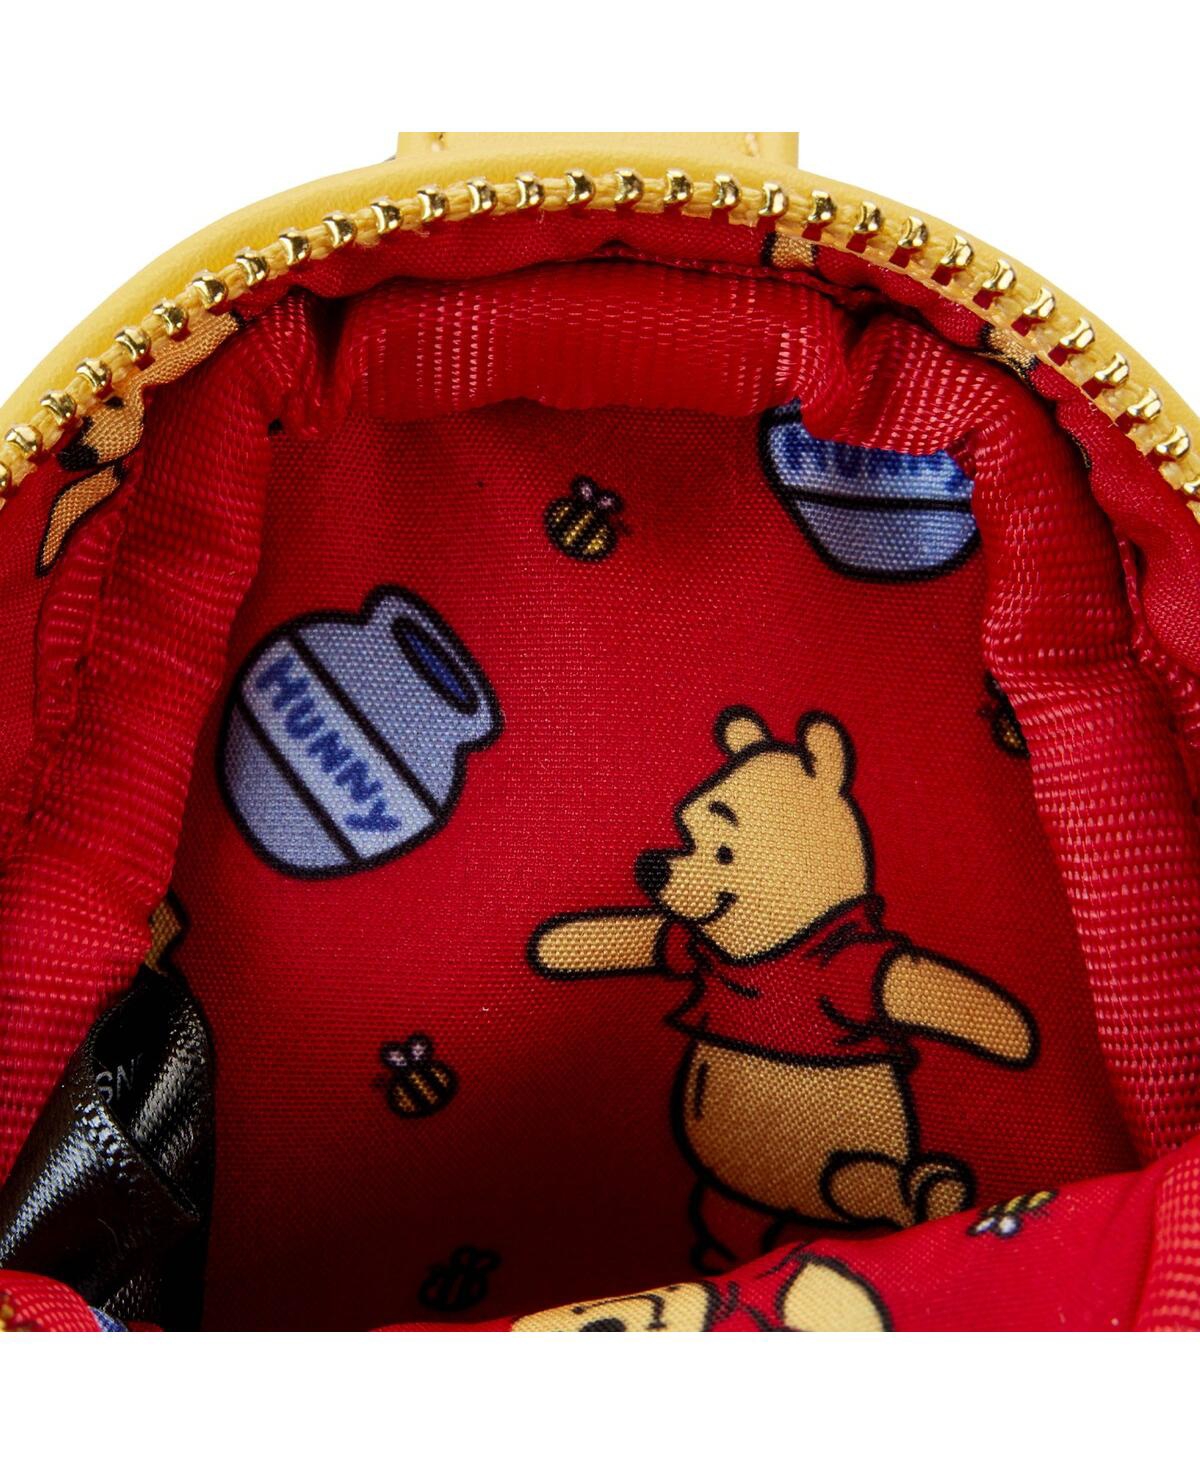 Shop Loungefly Winnie The Pooh Treat Bag In No Color